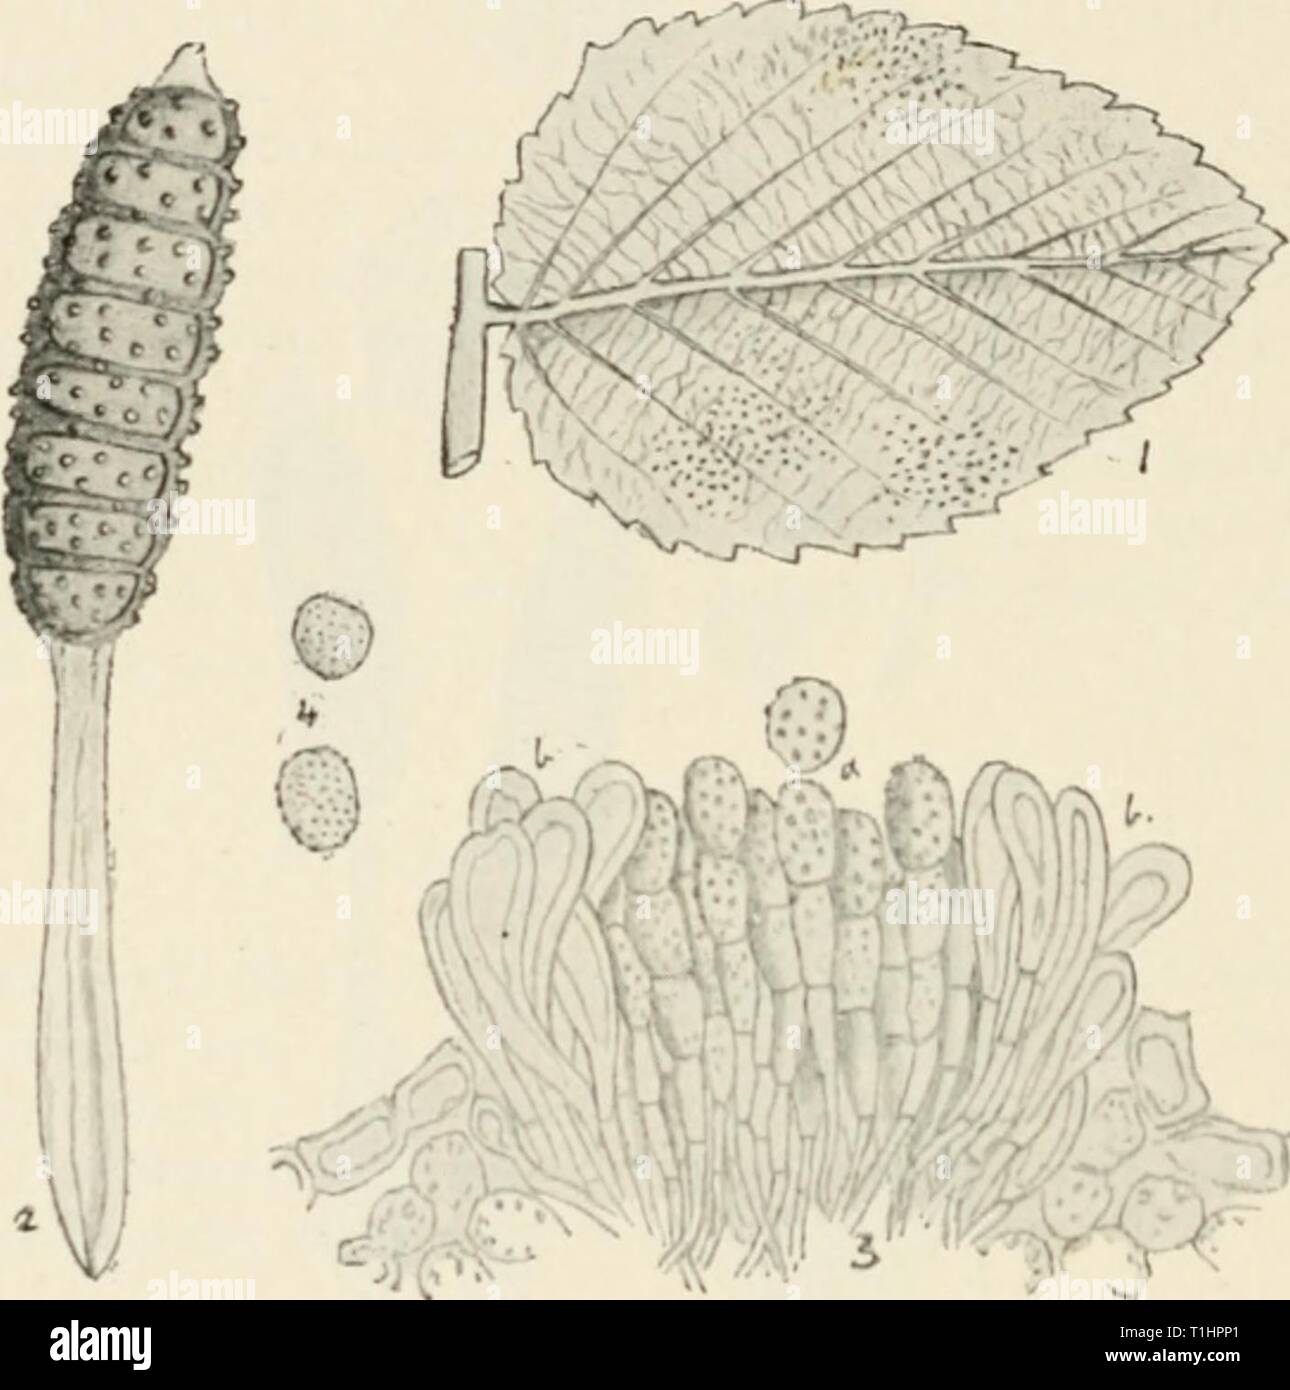 Diseases of cultivated plants and Diseases of cultivated plants and trees  diseasesofcultiv00massuoft Year: [1910?]  314 DISEASES OF CULTIVATED PLANTS the pustules are pale orange, and irregularly scattered. Later in the season small black clusters of teleutospores appear on the under surface of the leaves. Aecidiospores orange, aculeolate, 20-28 yu, diam., paraphyses clavate, orange. Uredospores orange, aculeate, 16-22 fi. Teleutospores oblong, apiculate, warted, 5-10 septate, black and opaque, 90-140 X 20-35 /x, pedicel thickened below.    -r- Fig. g-i.—Phramidium riibi-idafi. i, pustules an Stock Photo